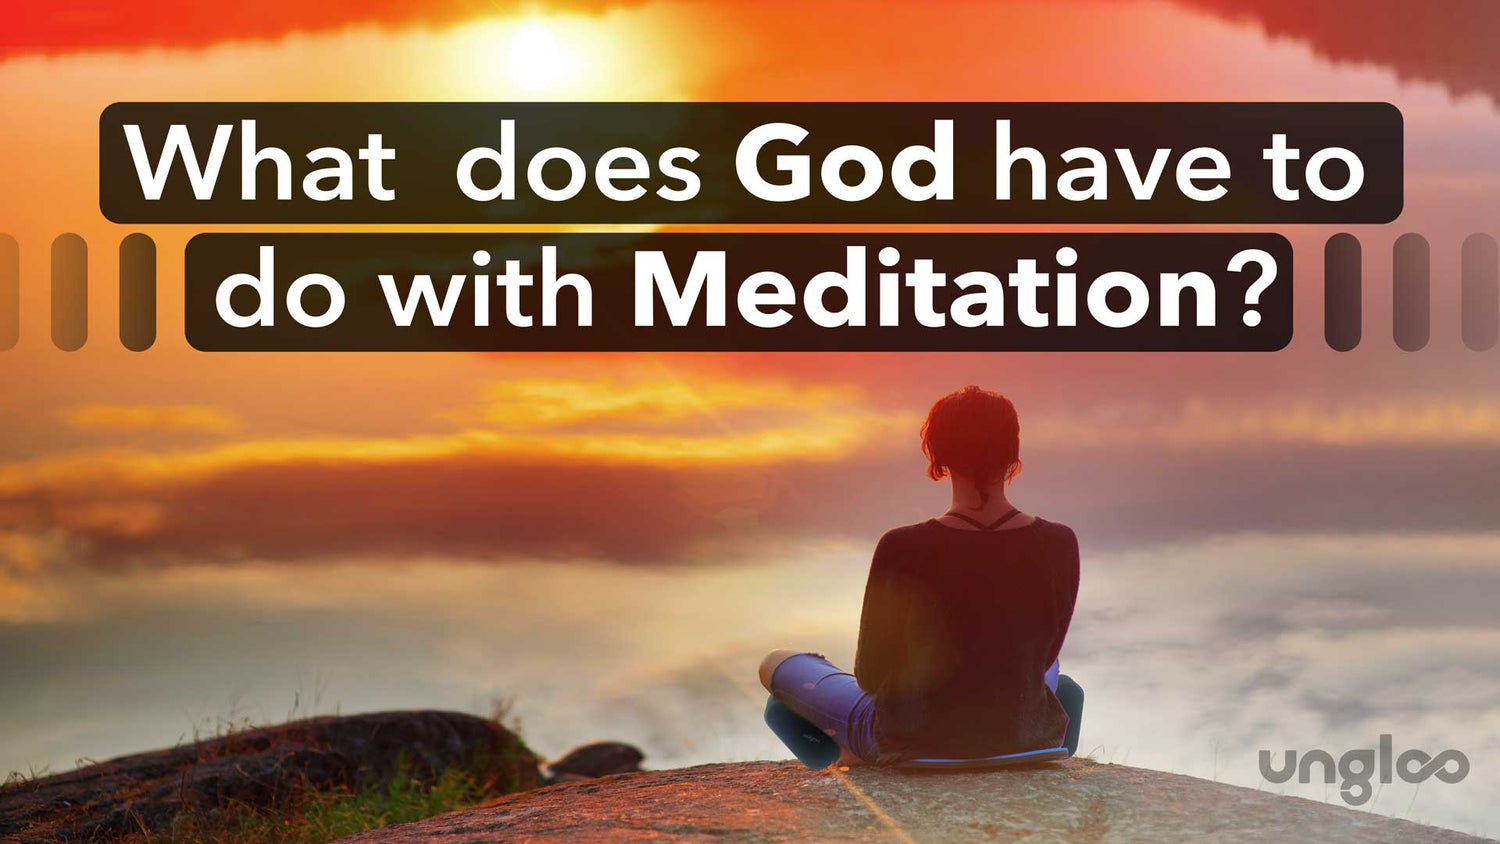 What Does God have to do with Meditation?